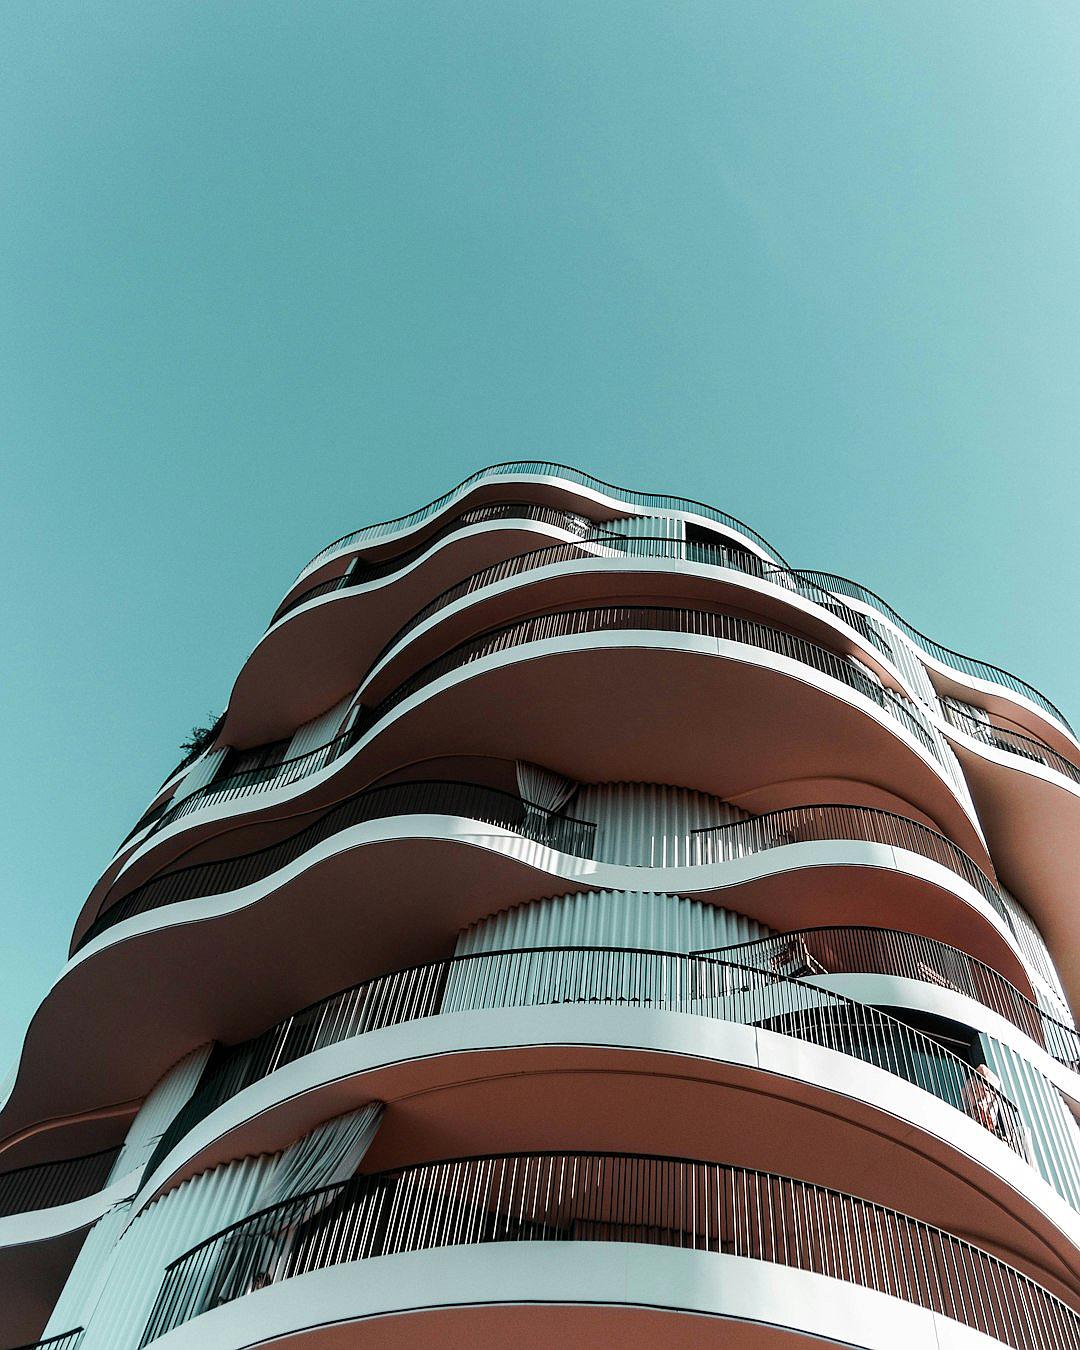 low angle photo of a curved residential building with balconies, peach colored facade, minimalist design in the style of [Bjarke Ingels](https://goo.gl/search?artist%20Bjarke%20Ingels) against the blue sky